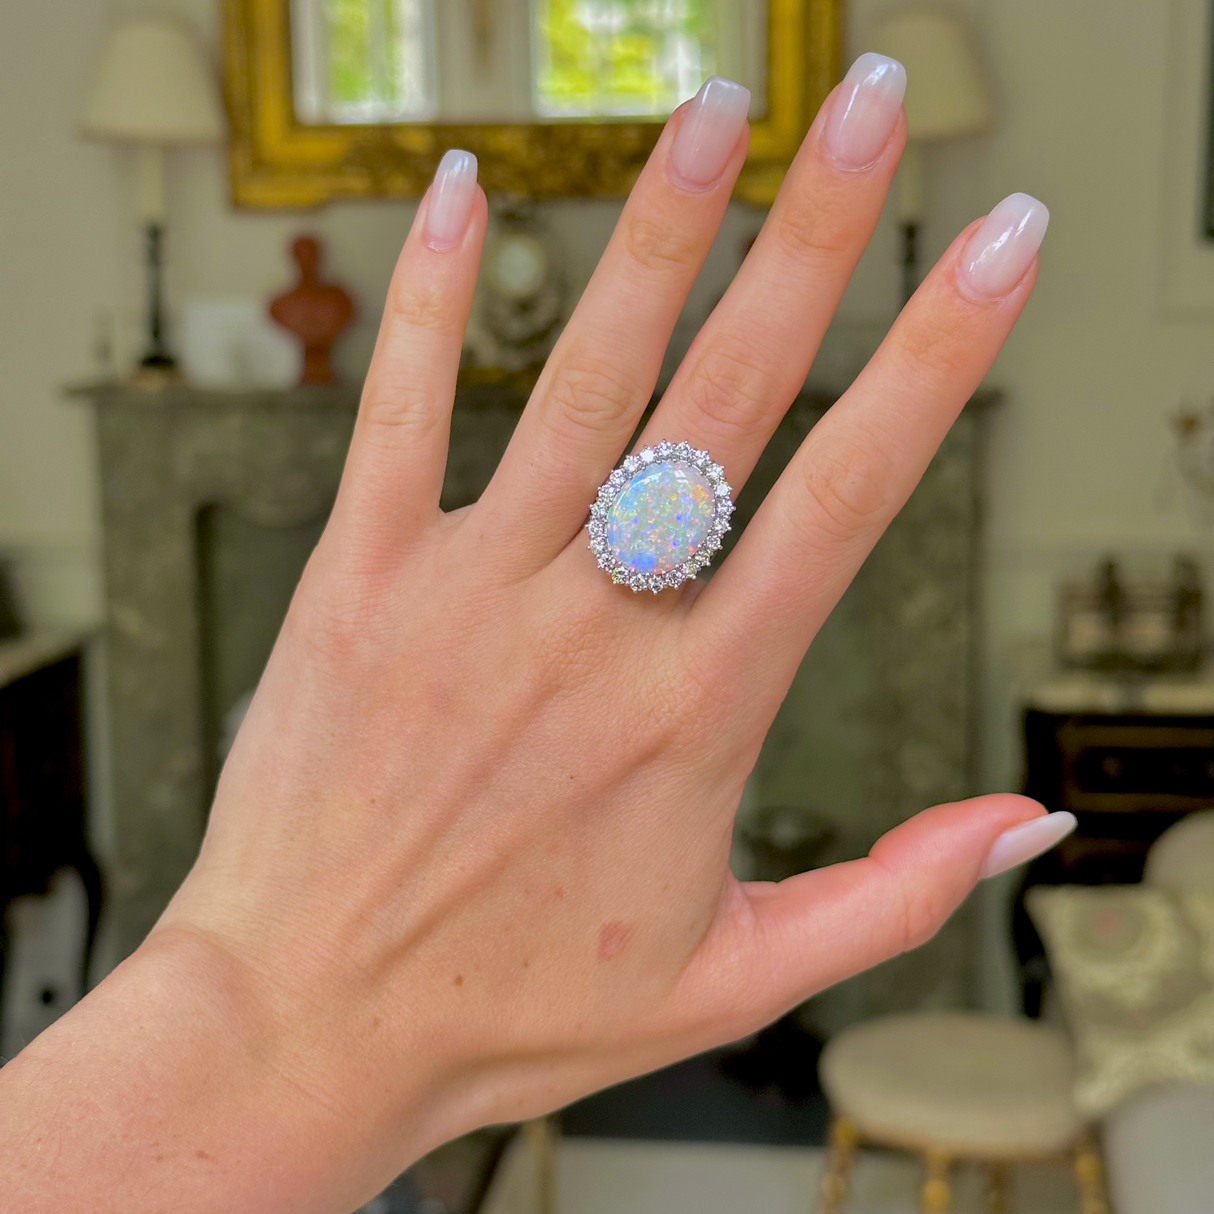 White opal and diamond cluster ring,  worn on hand.